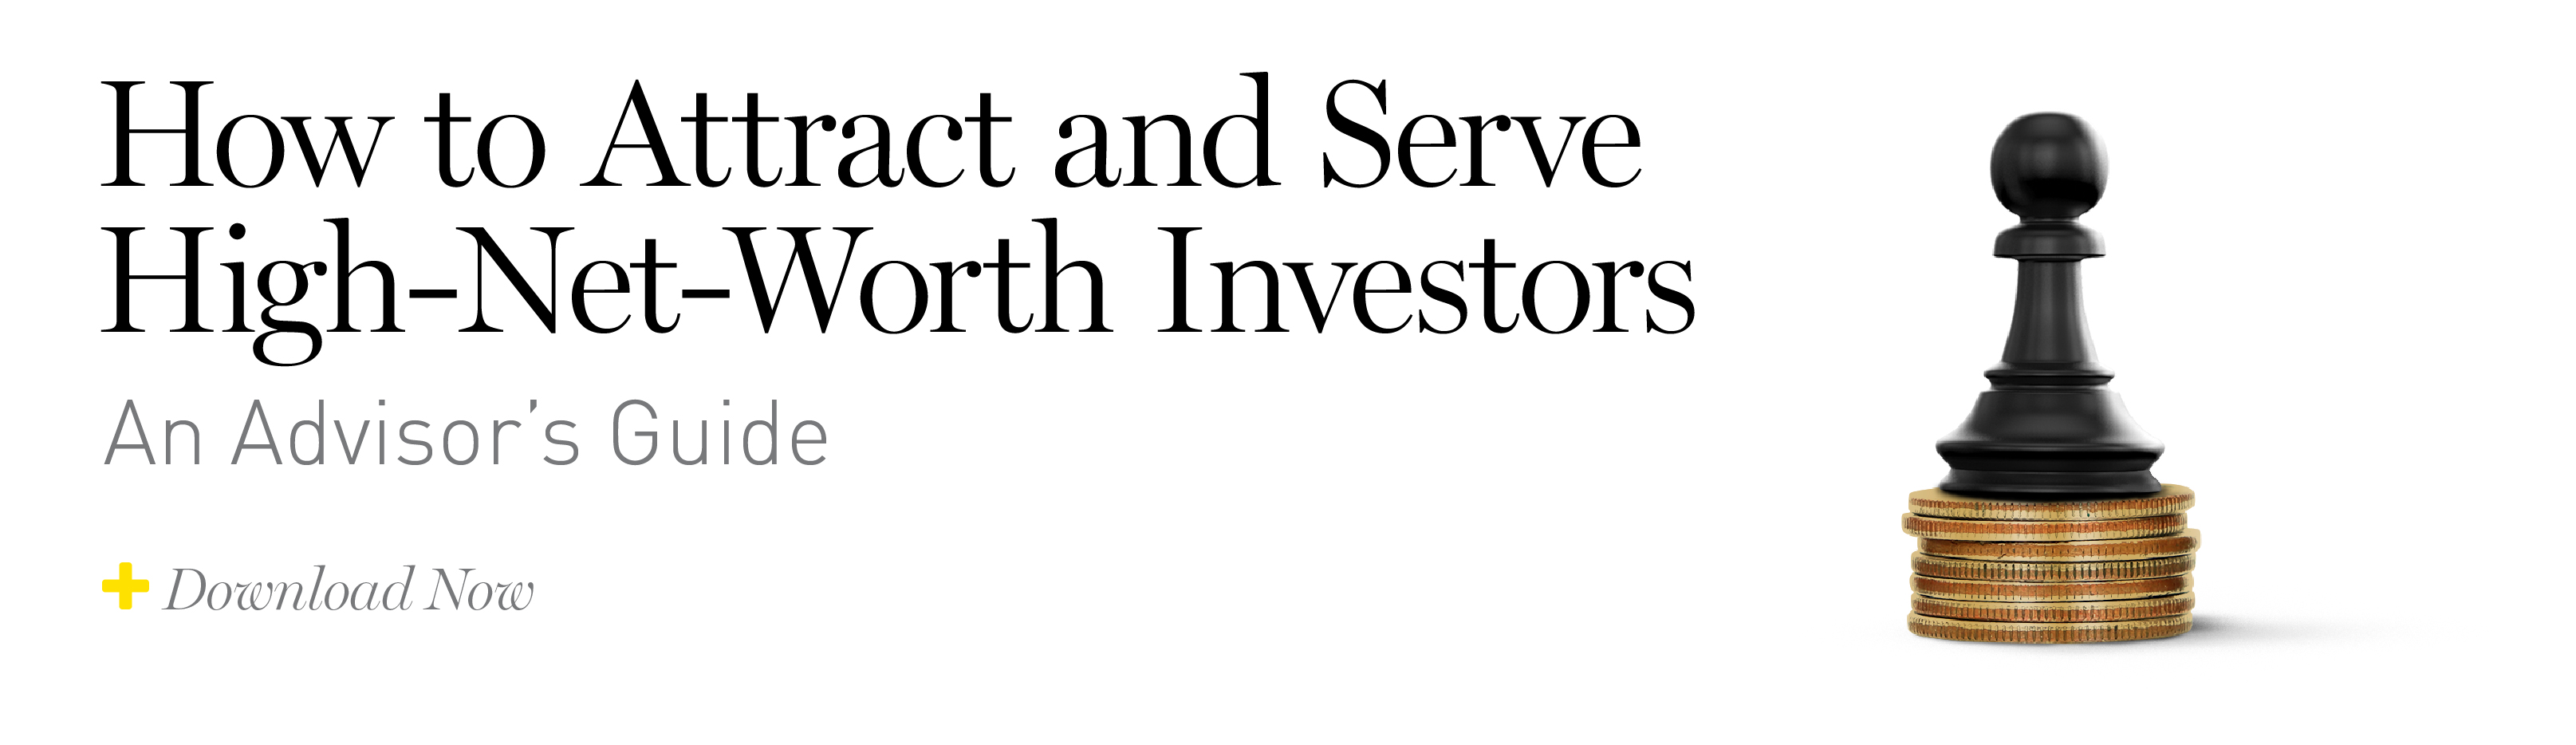 How to Attract and Serve High Net Worth Investors